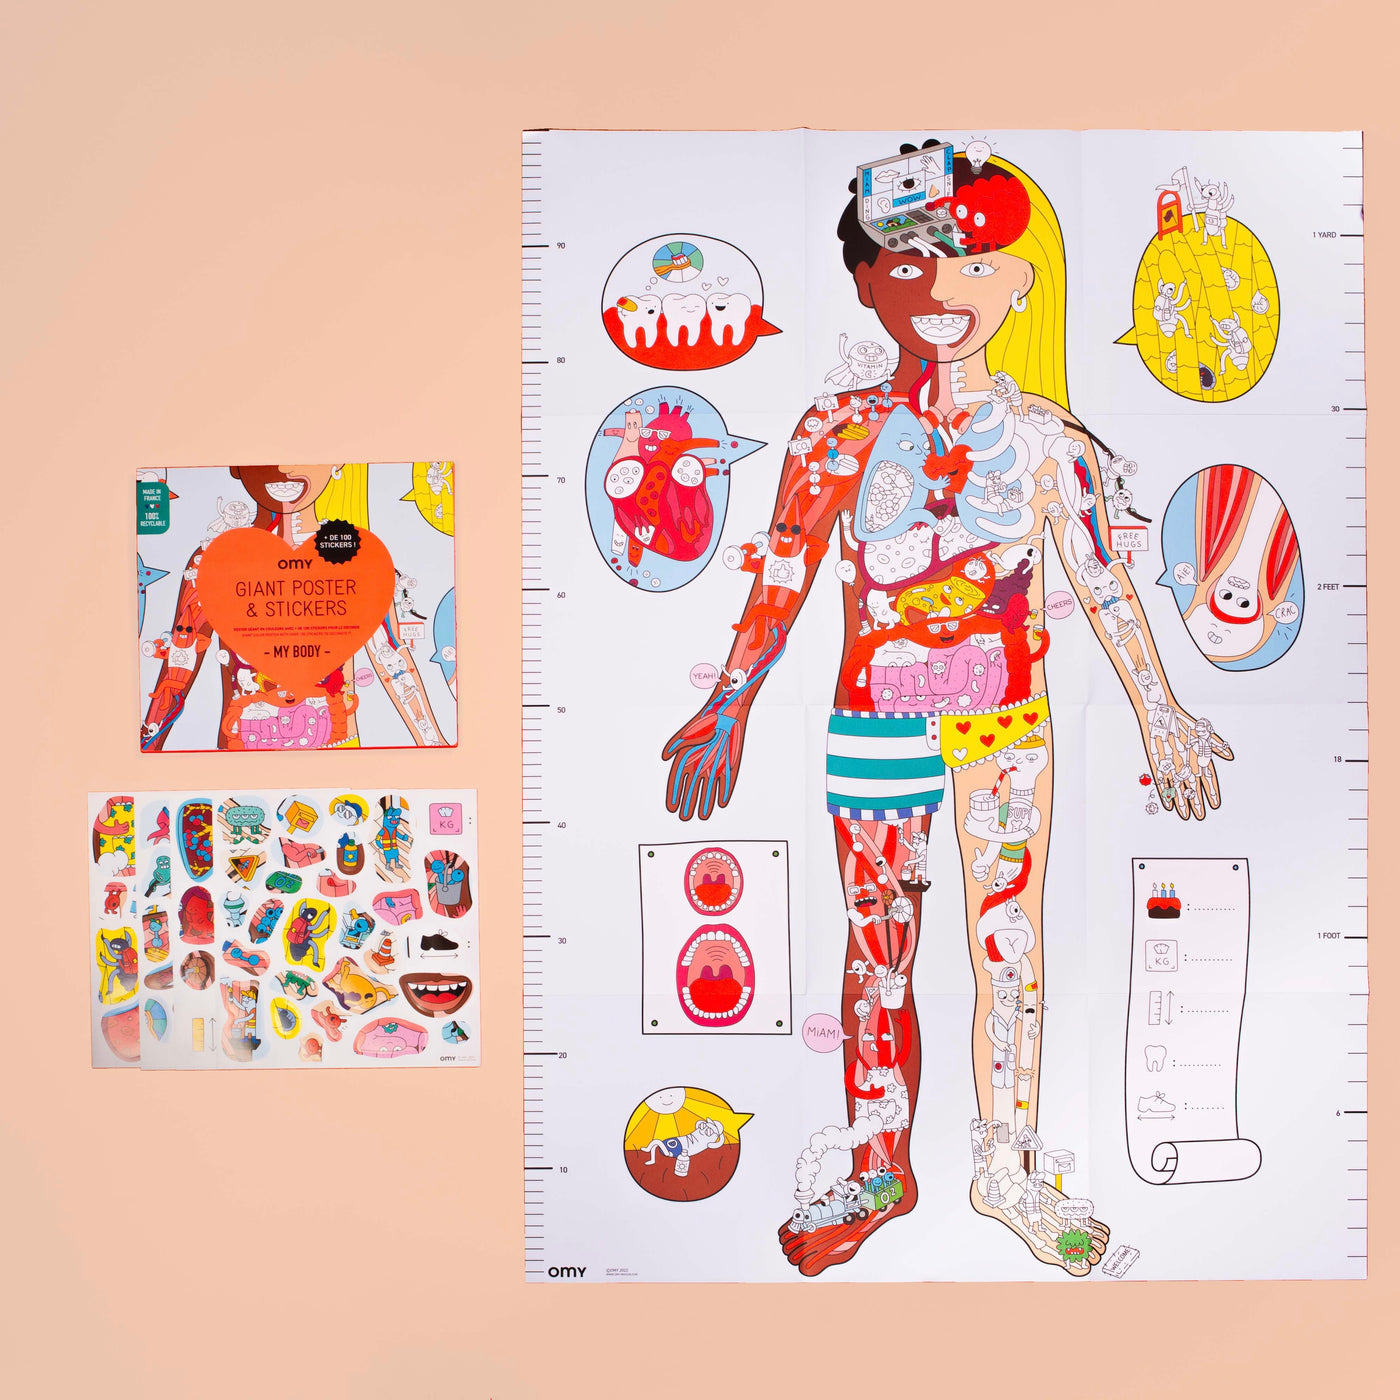 Giant poster & stickers my body (3+ years)